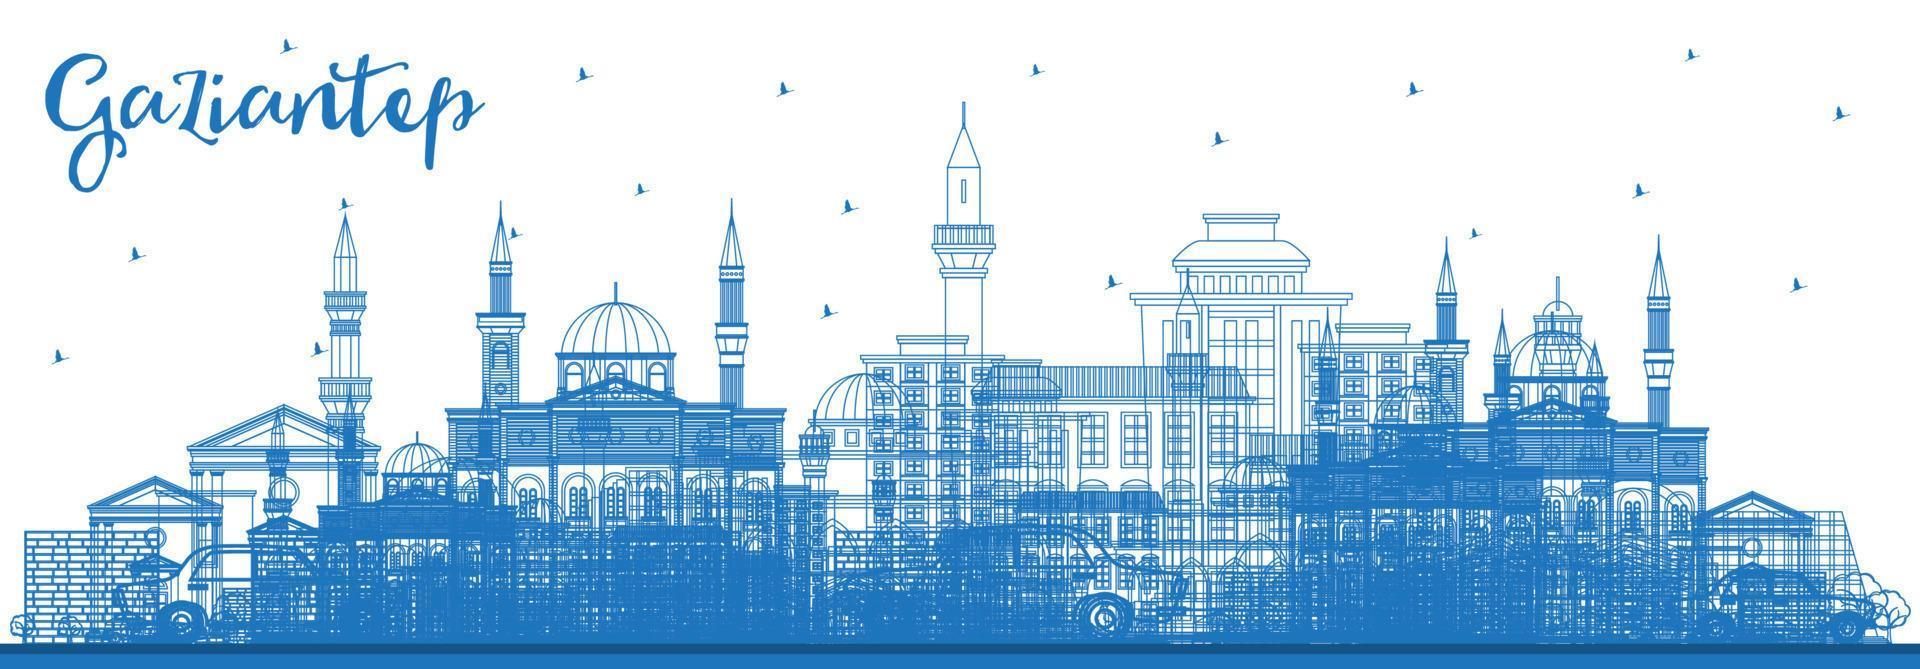 Outline Gaziantep Turkey City Skyline with Blue Buildings. Gaziantep Cityscape with Landmarks. vector